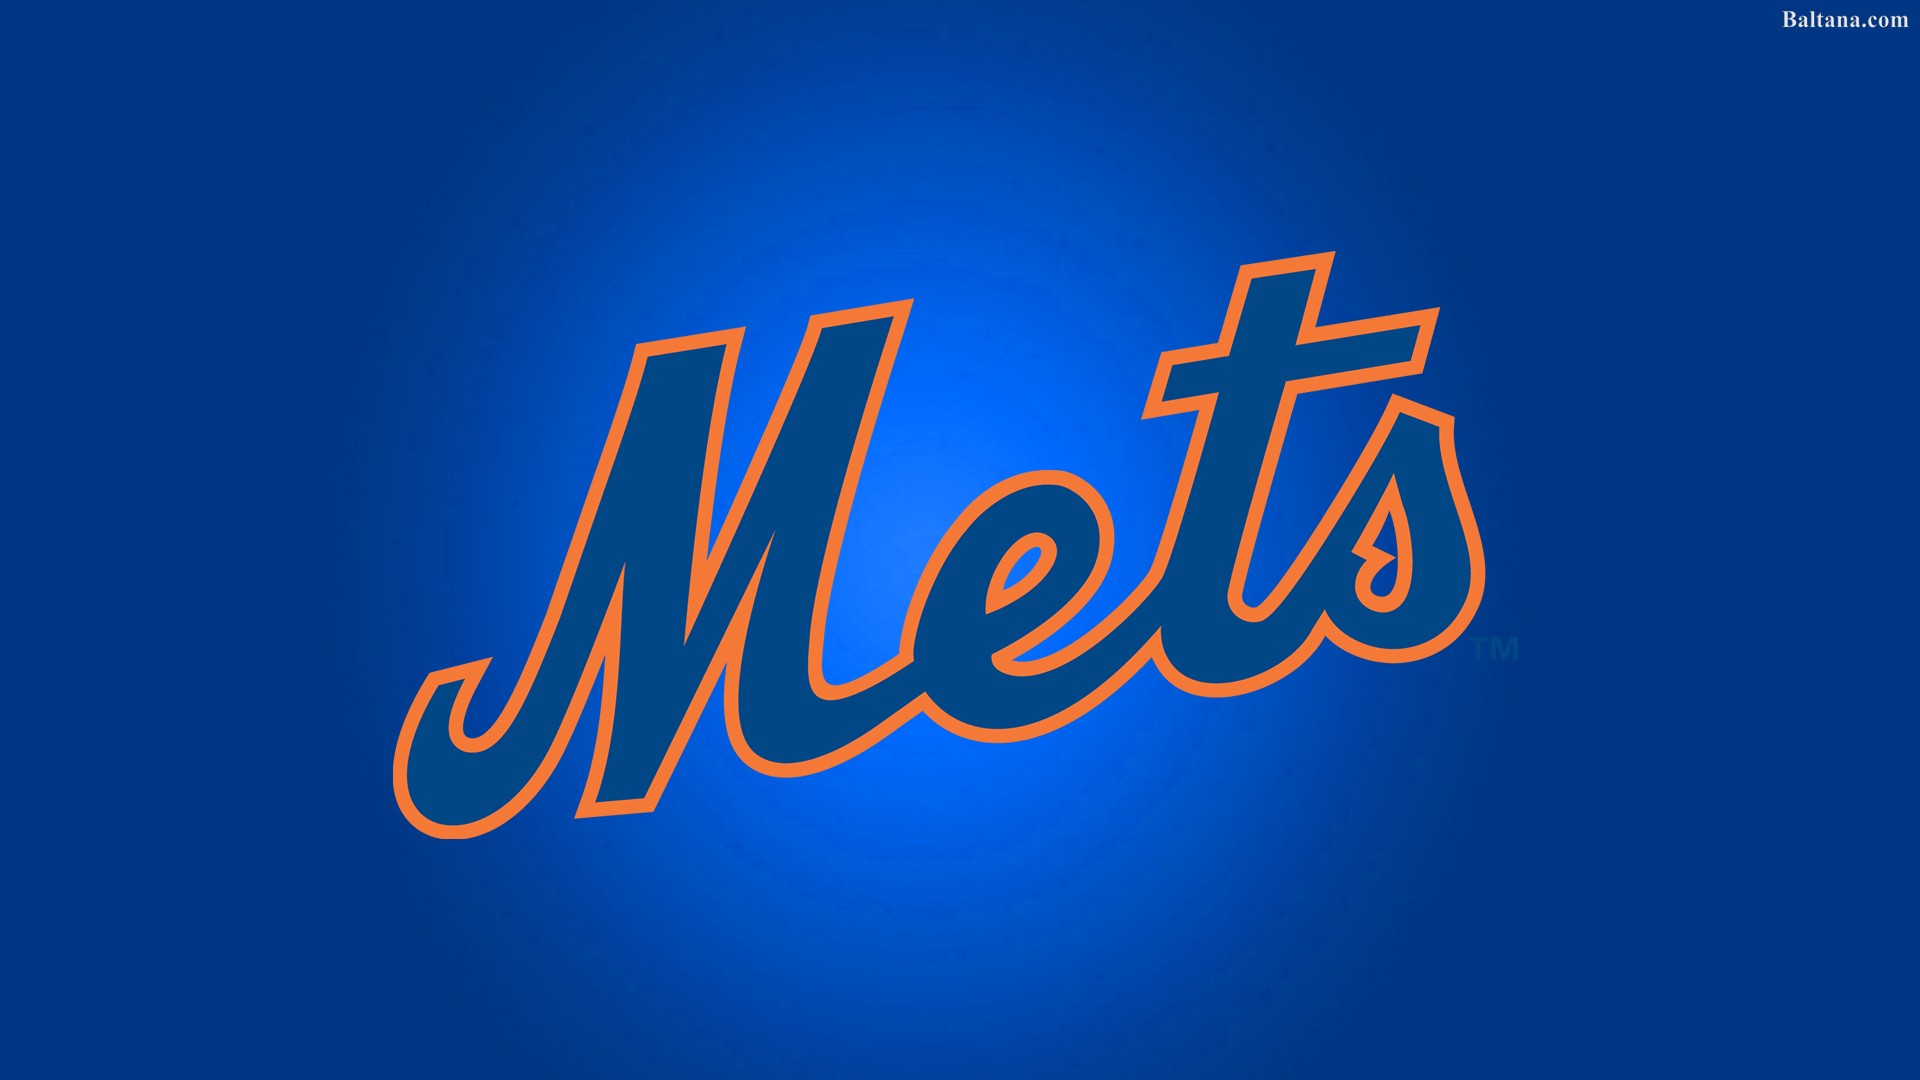 New York Mets Background Wallpaper - Logos And Uniforms Of The New York Mets - HD Wallpaper 